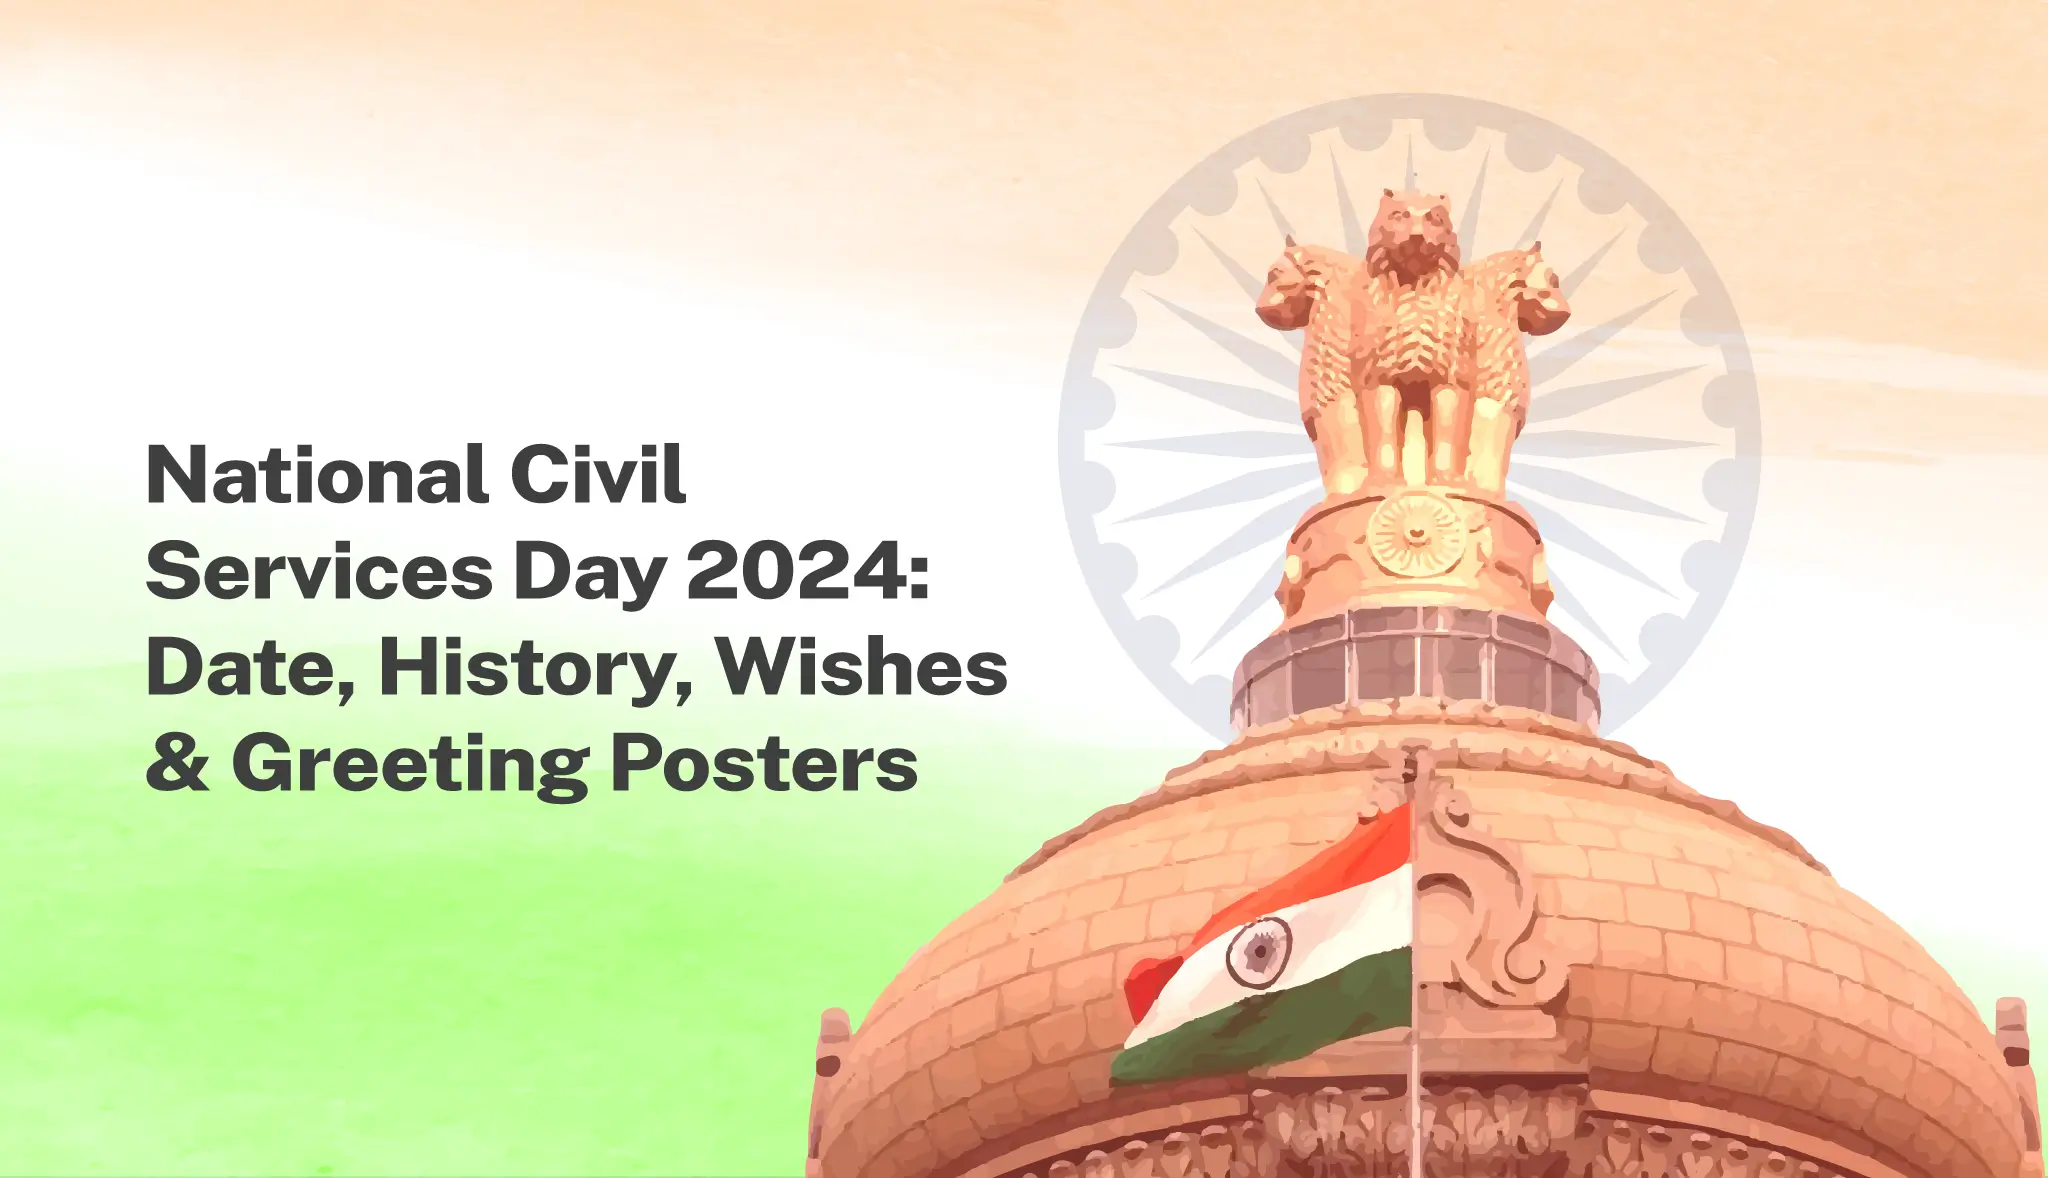 National Civil Service Day 2024: Date, History, Wishes & Posters - Postive